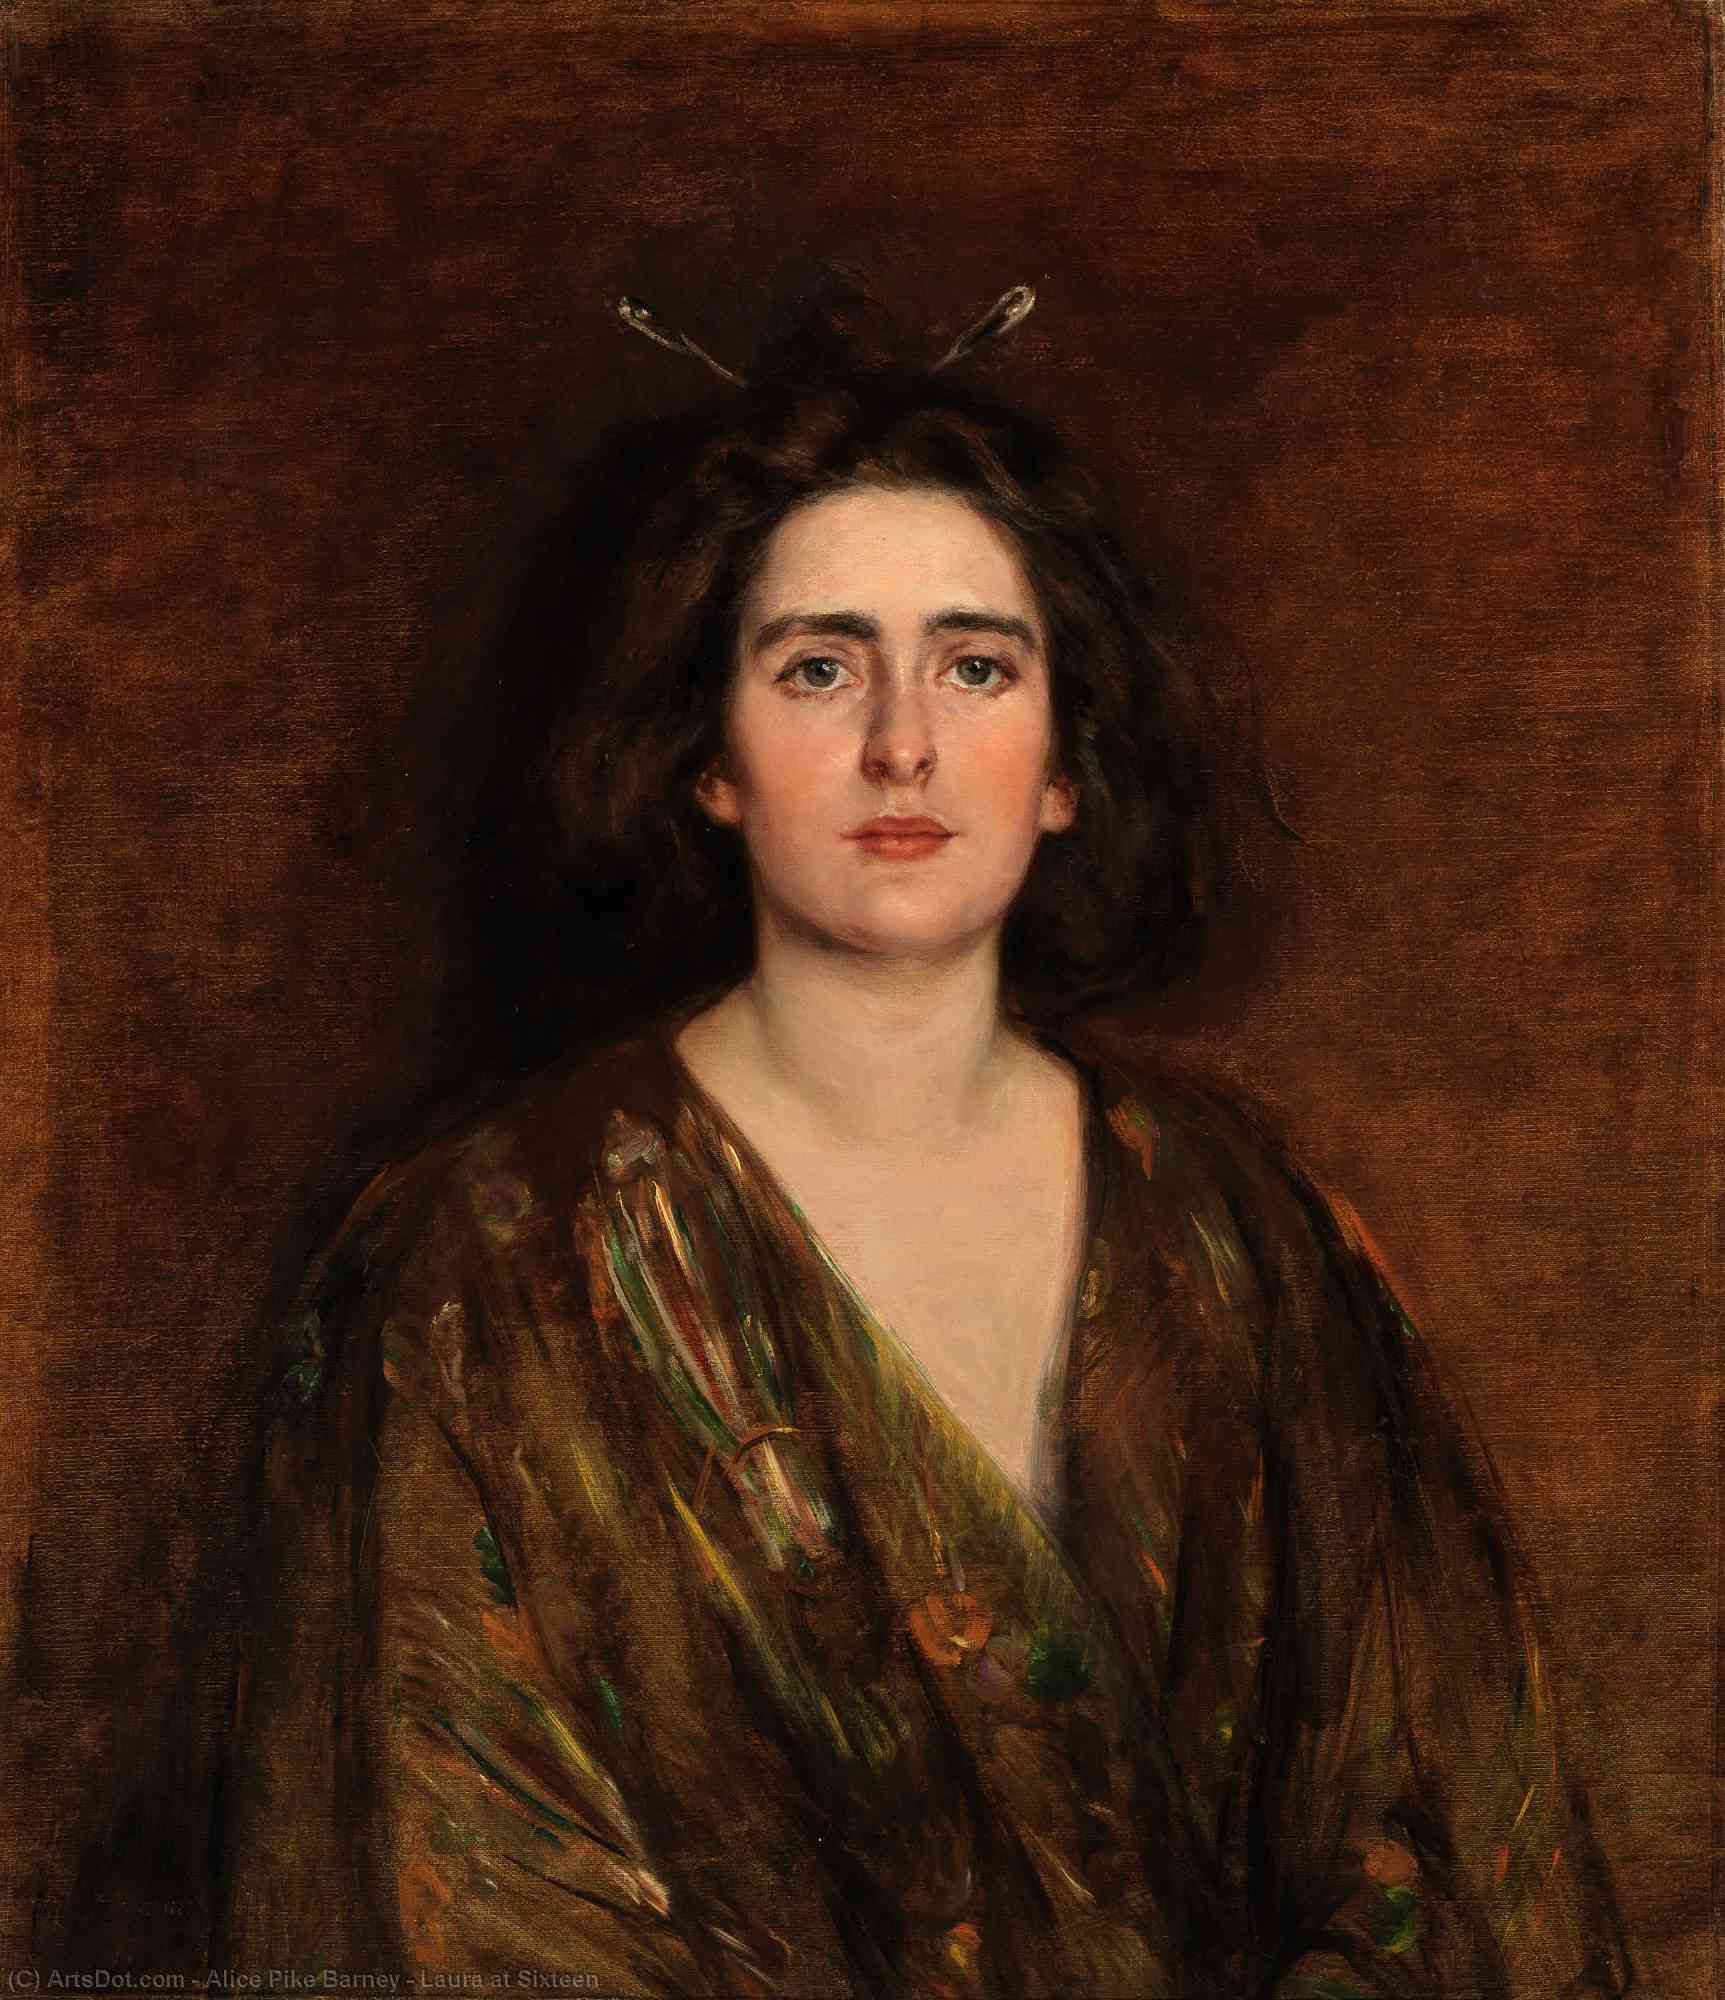 Buy Museum Art Reproductions Laura at Sixteen, 1896 by Alice Pike Barney (1857-1931, United States) | ArtsDot.com